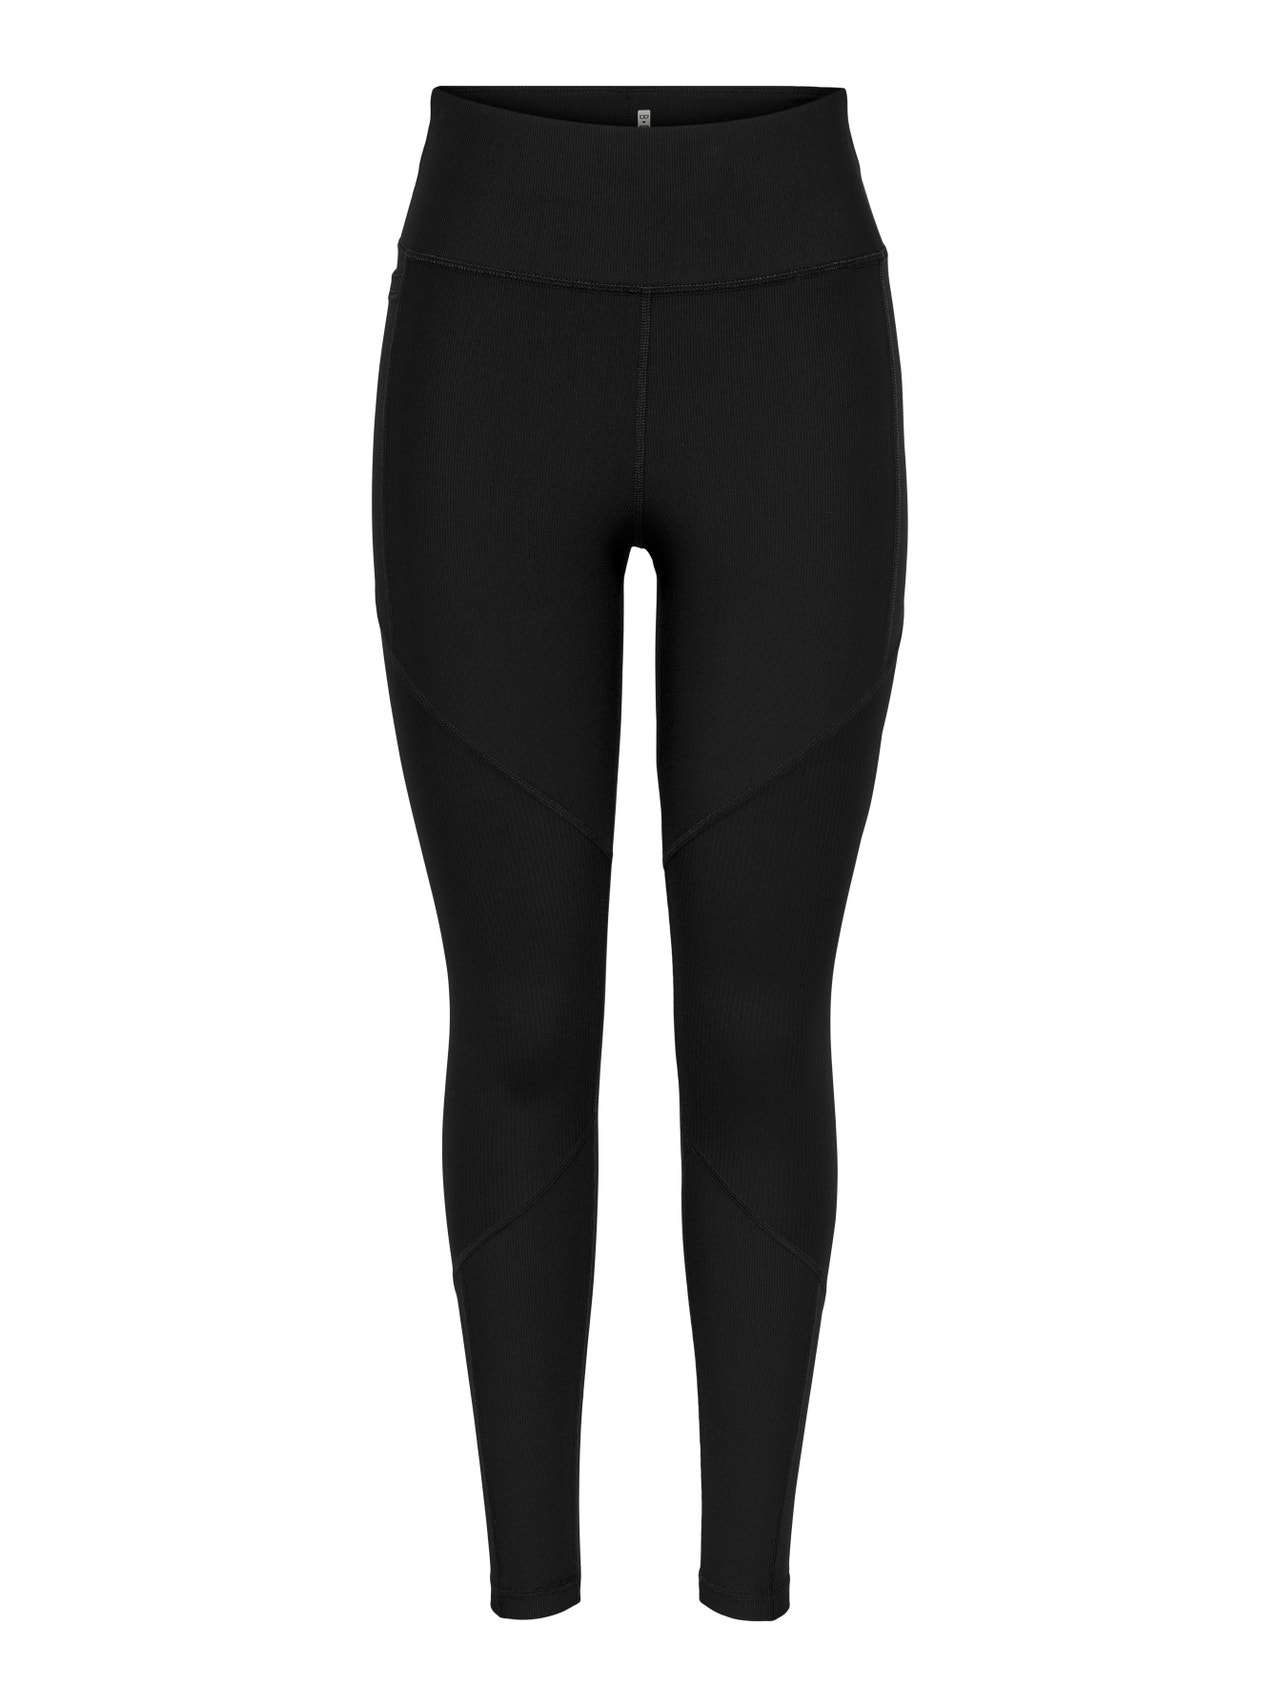 ONLY Tight Fit High waist Leggings -Black - 15207648